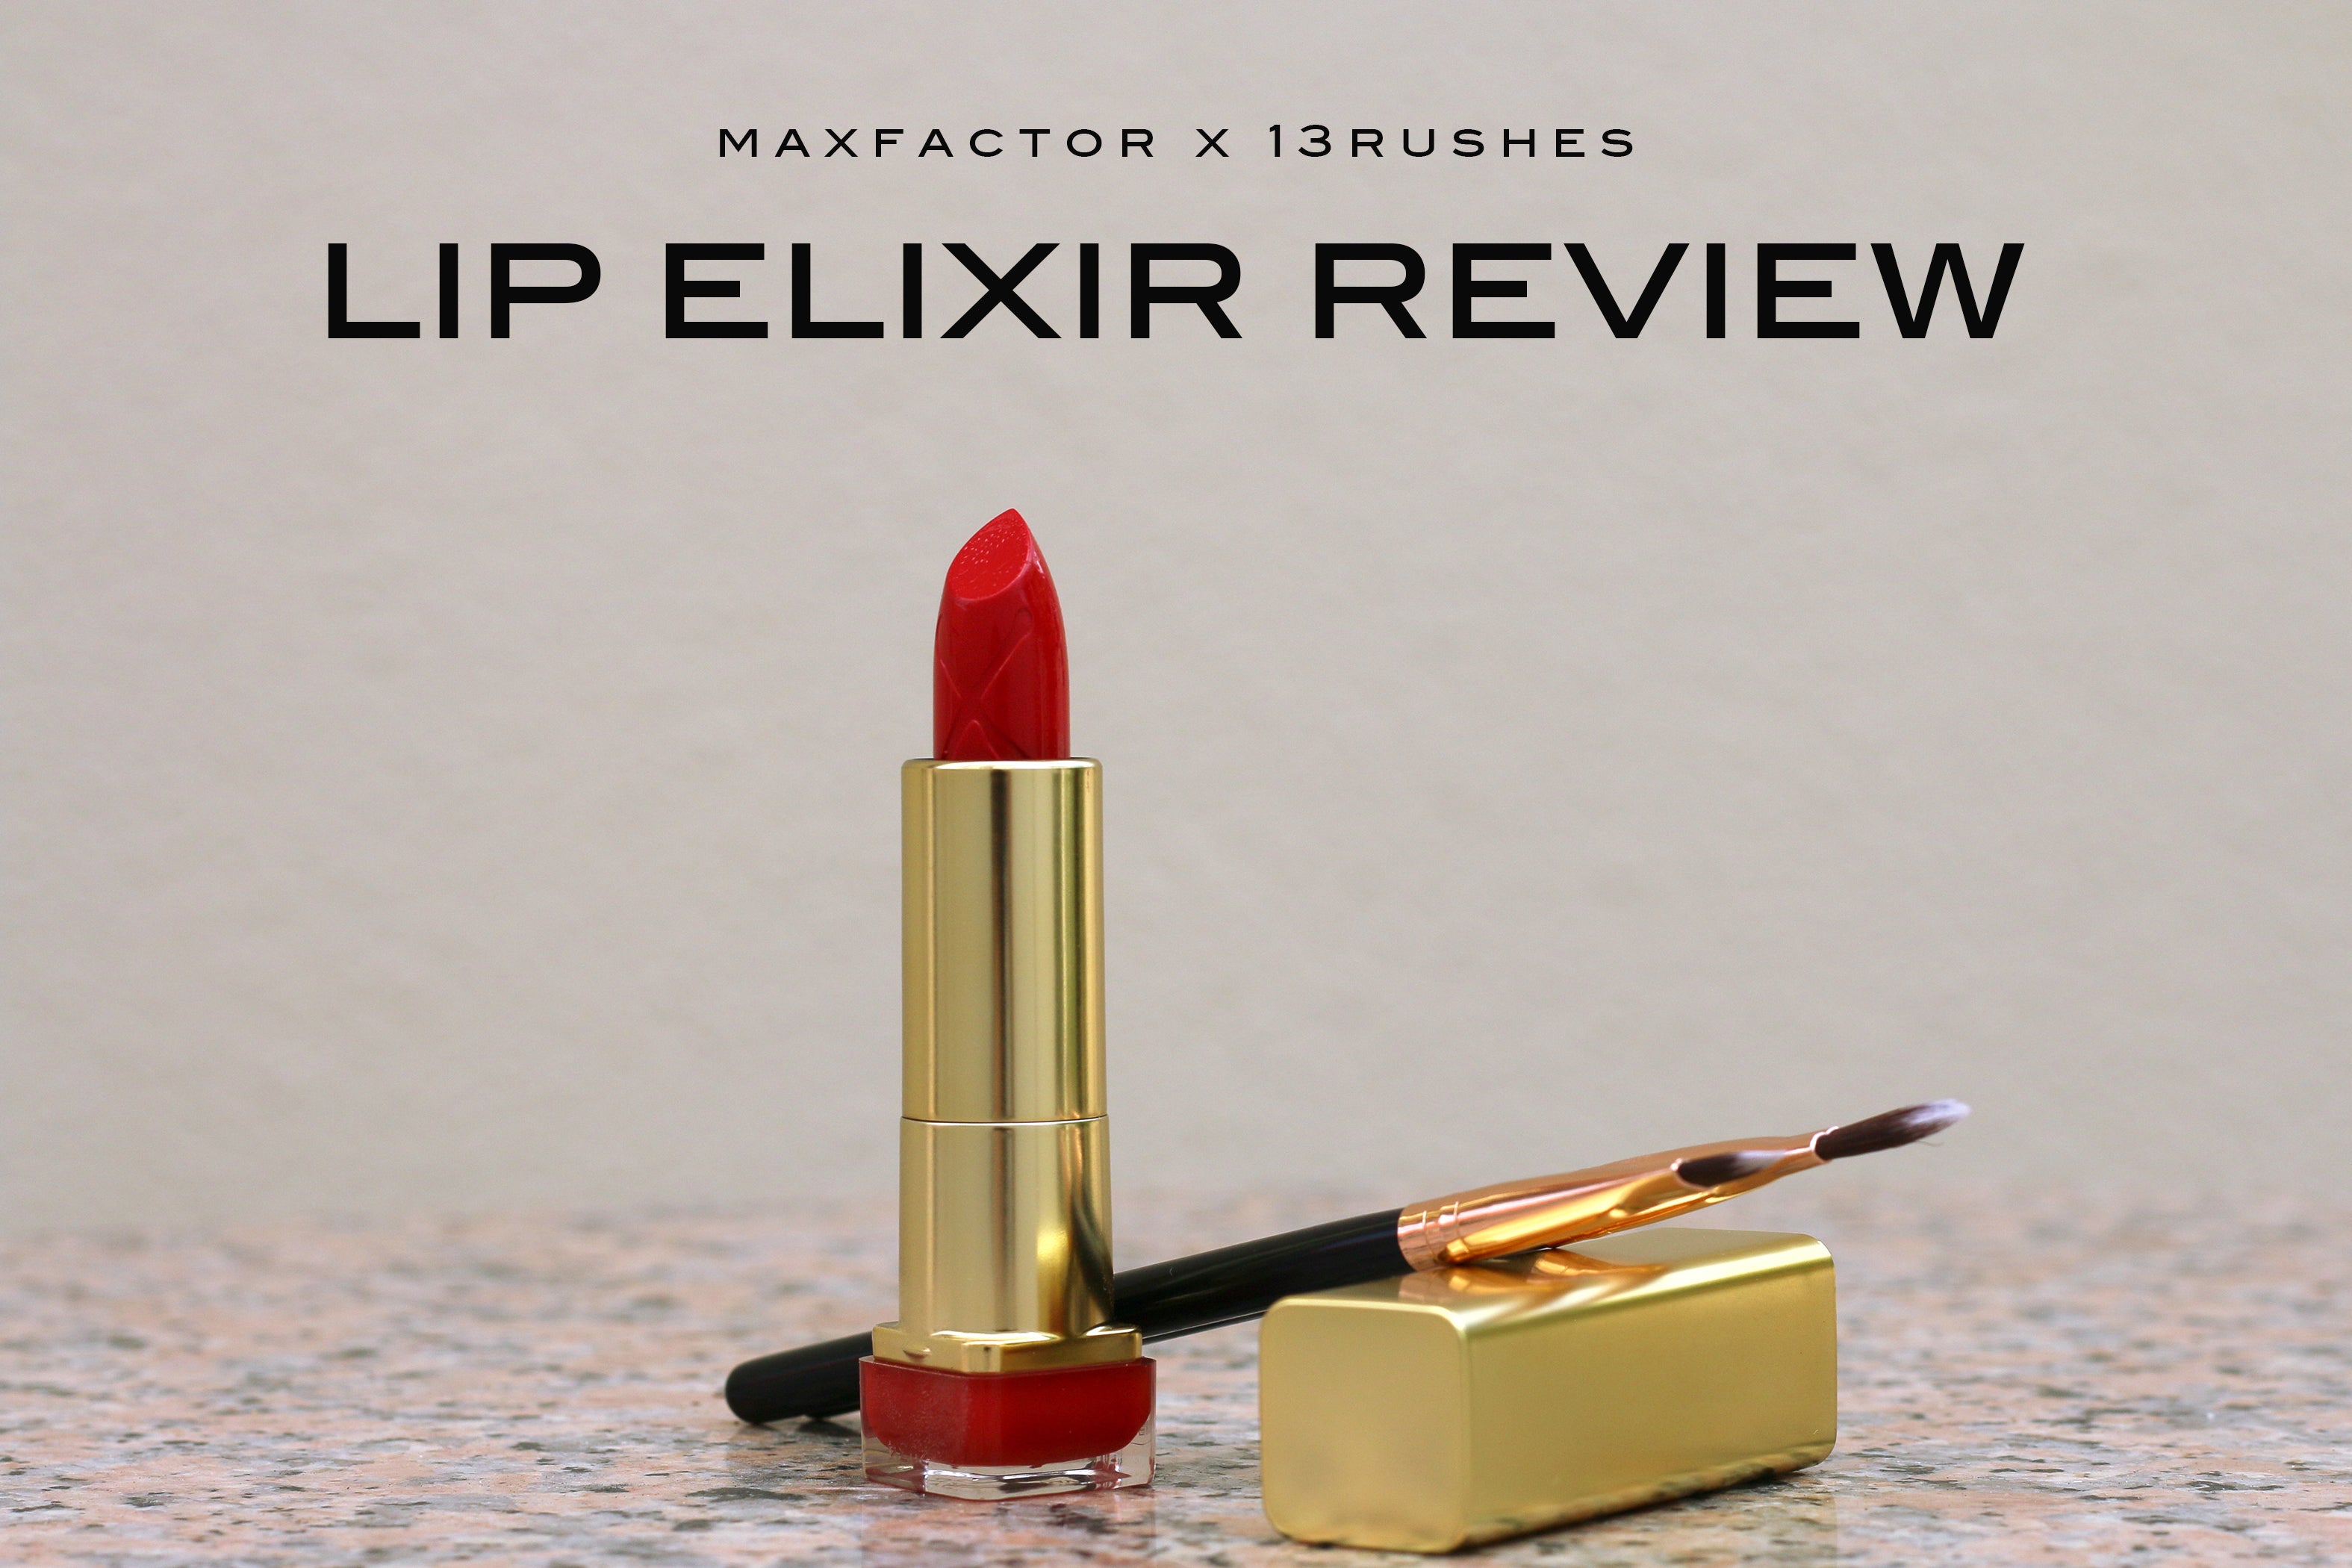 13rushes reviews: Max Factor’s Lip Elixir Lipstick (Read to the end for giveaway!)